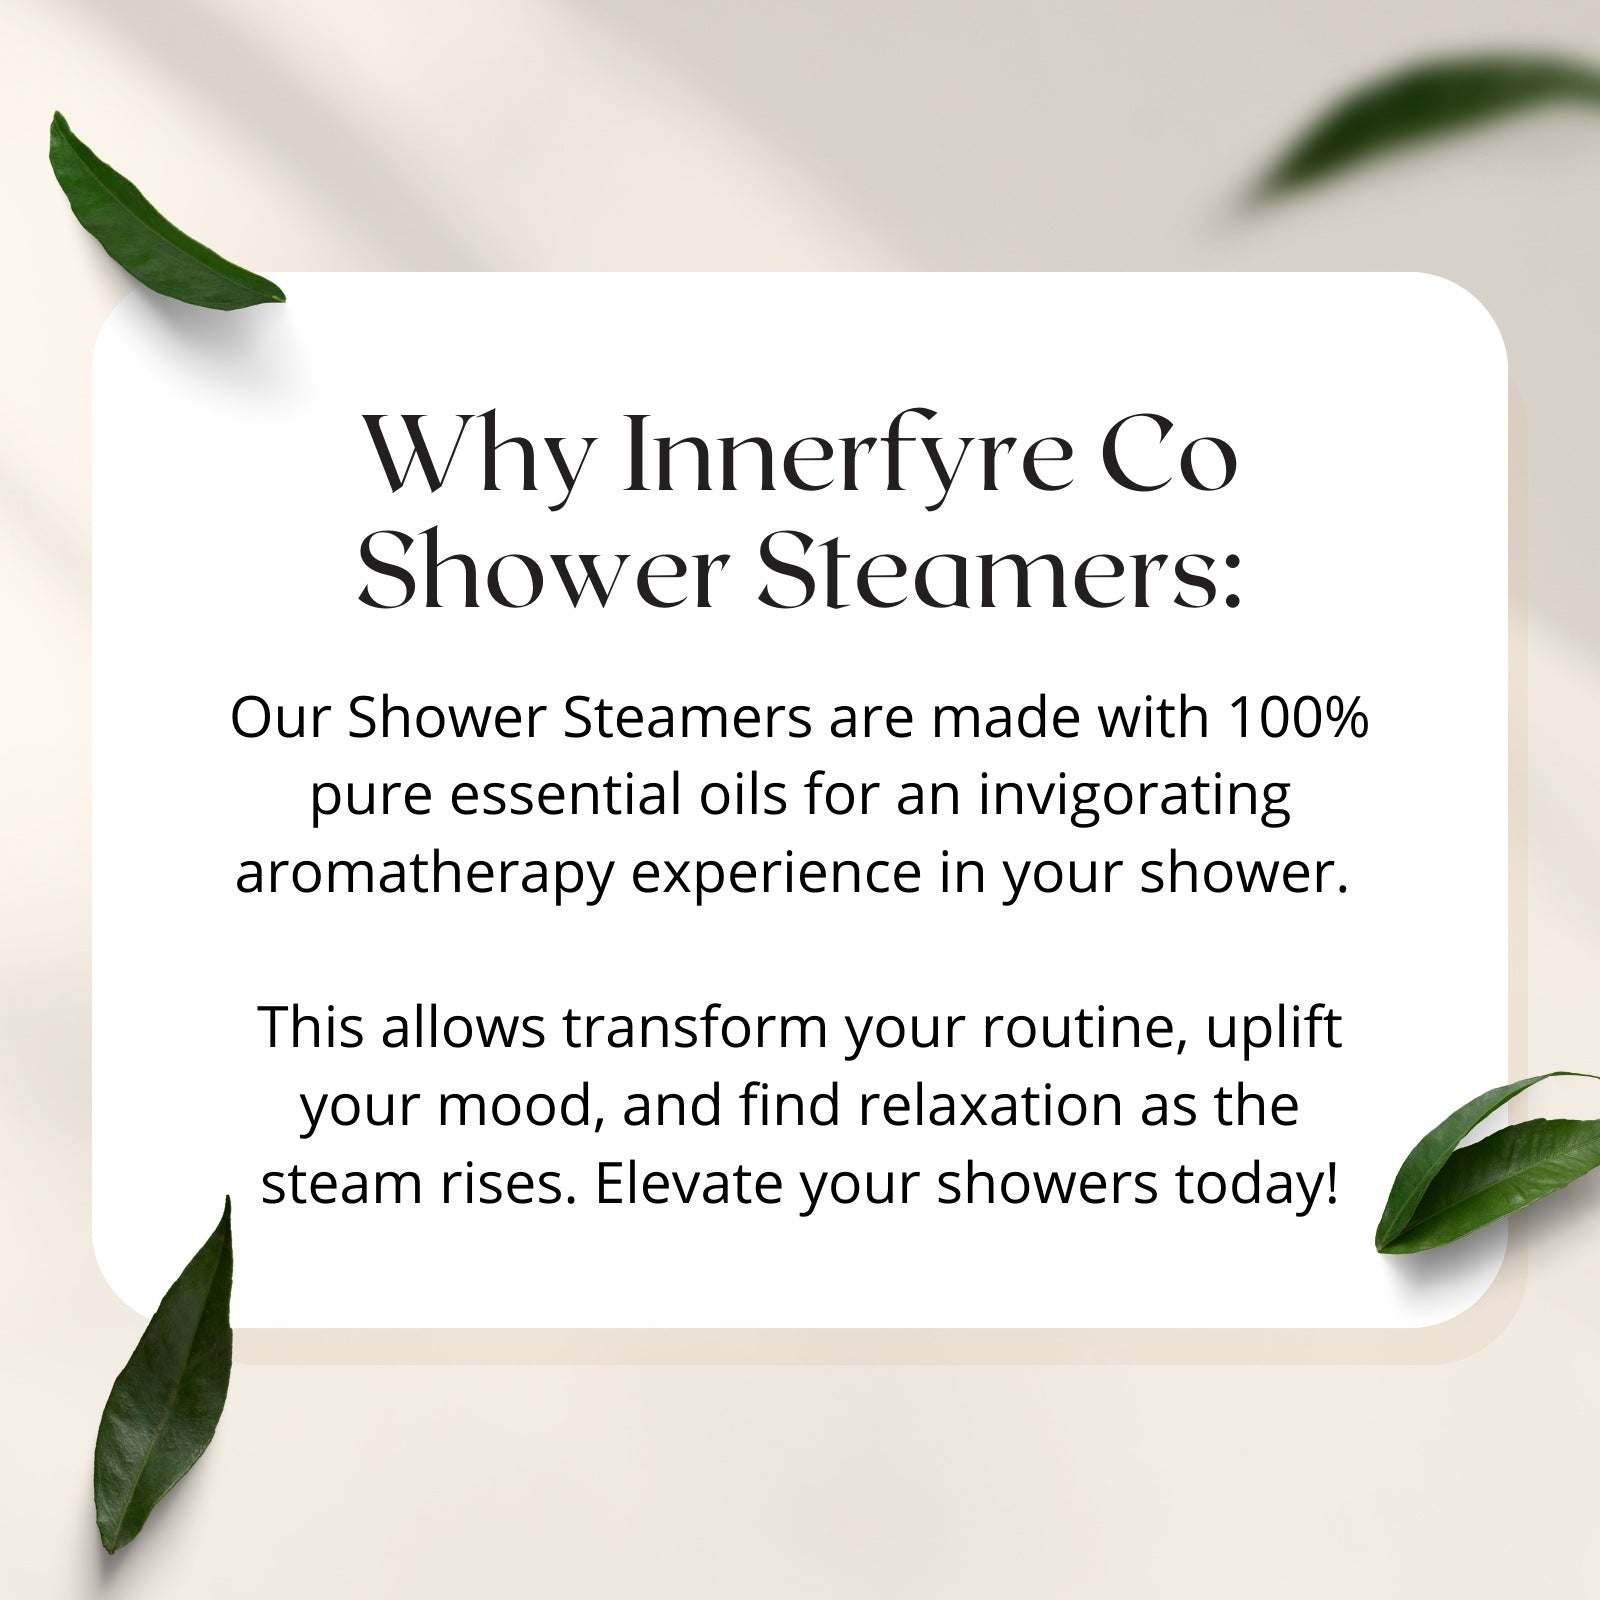 Why Innerfyre Co Shower Steamers